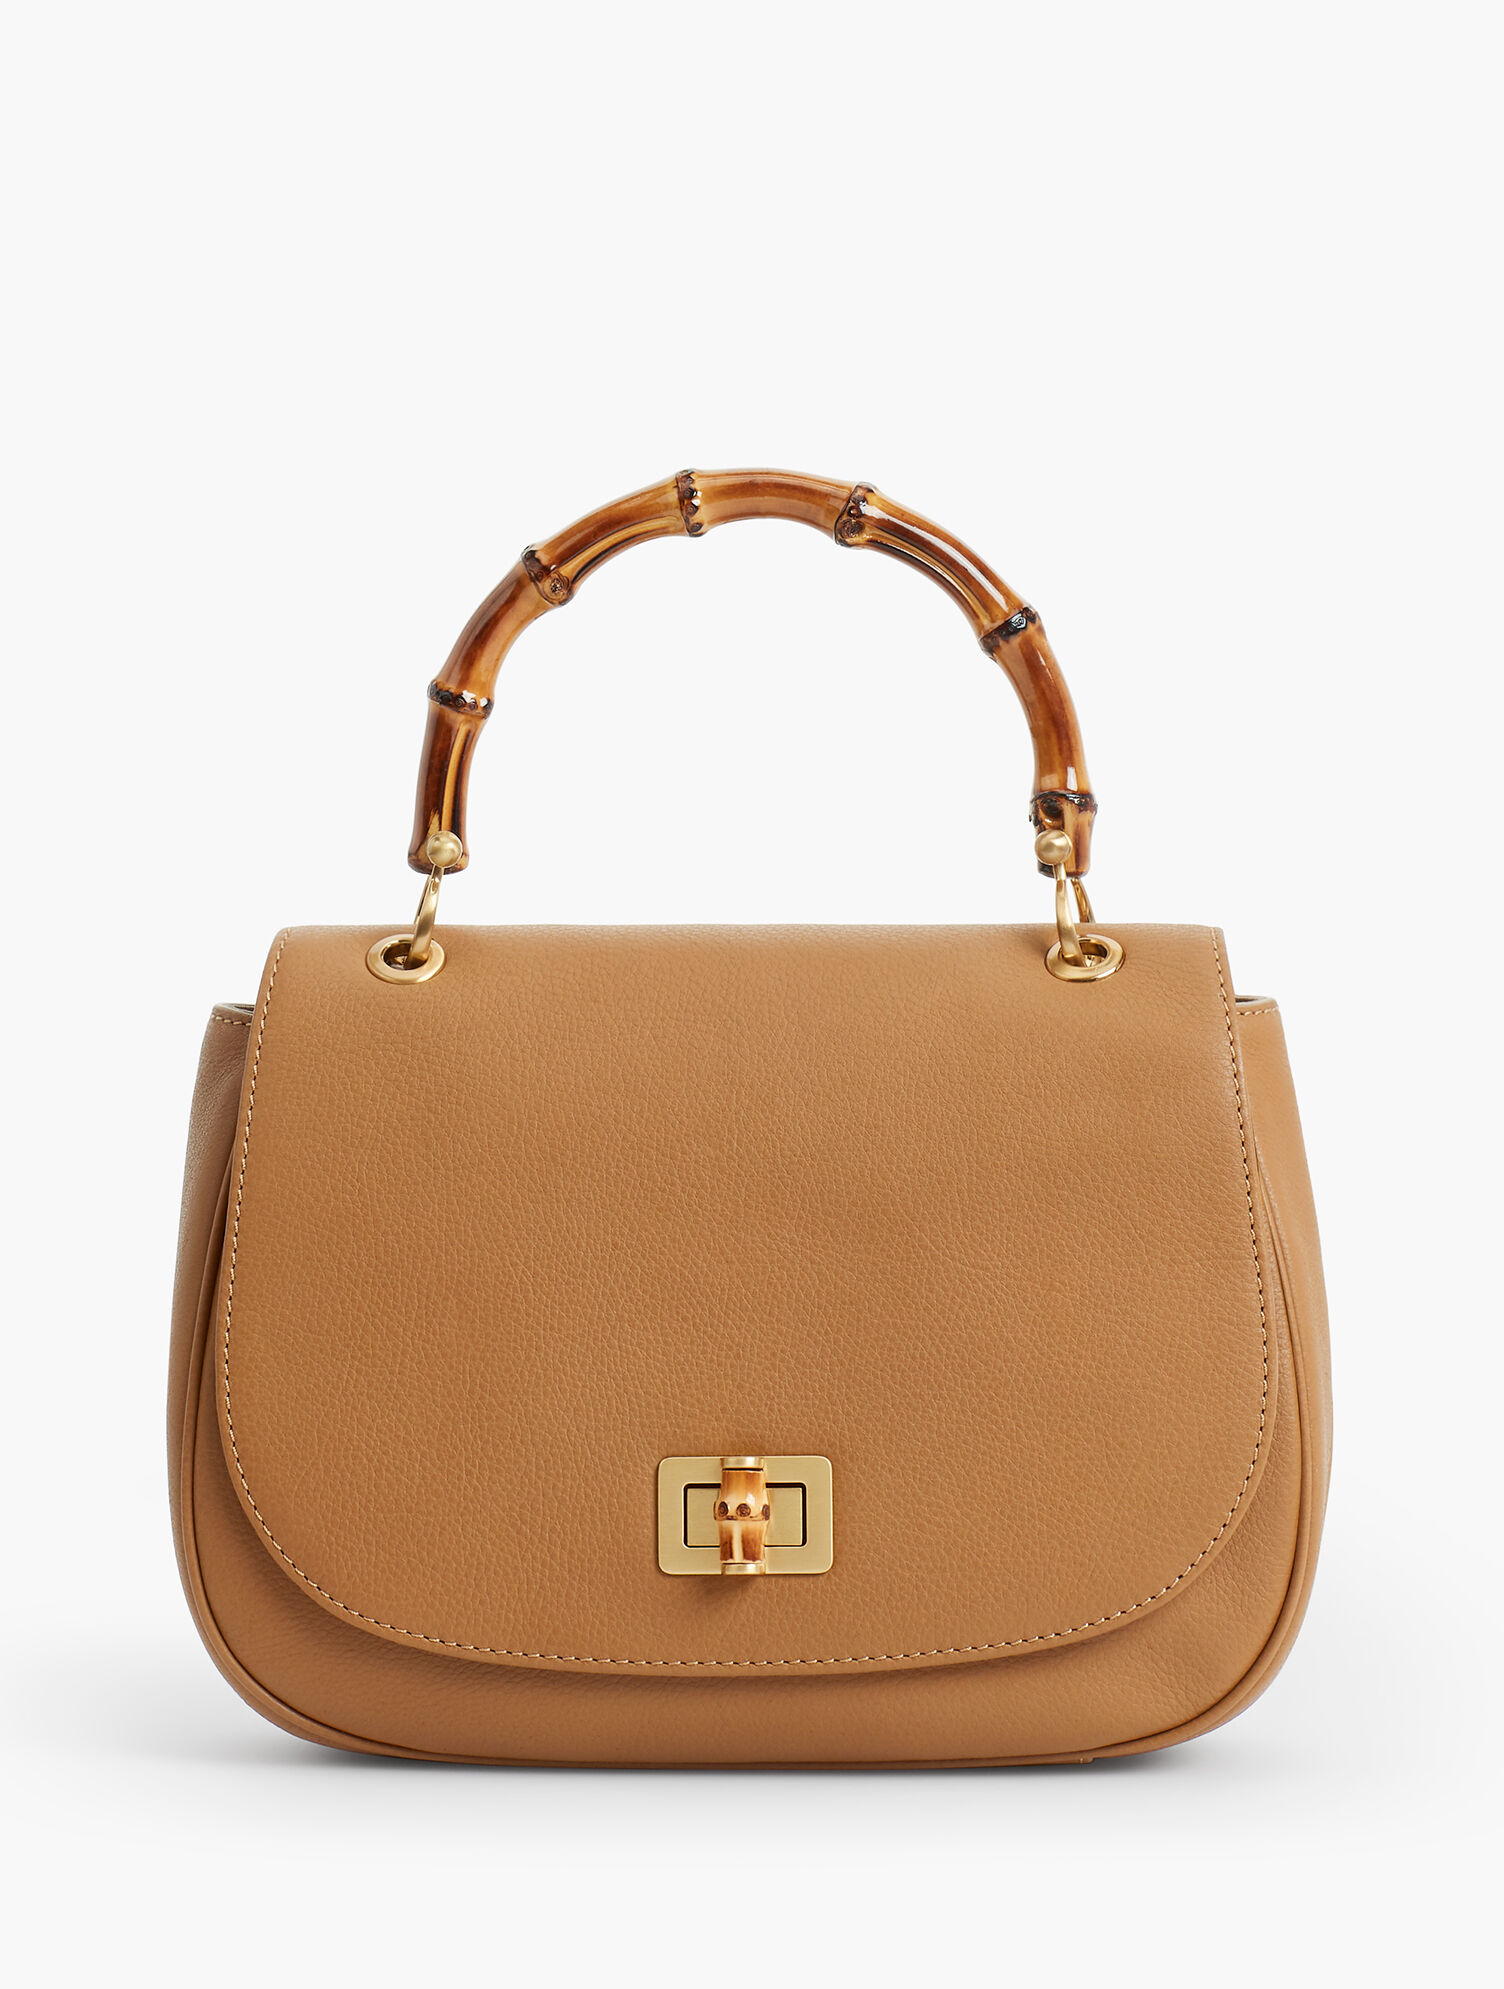 Bamboo-Handle Bags - Pebbled Leather | Talbots